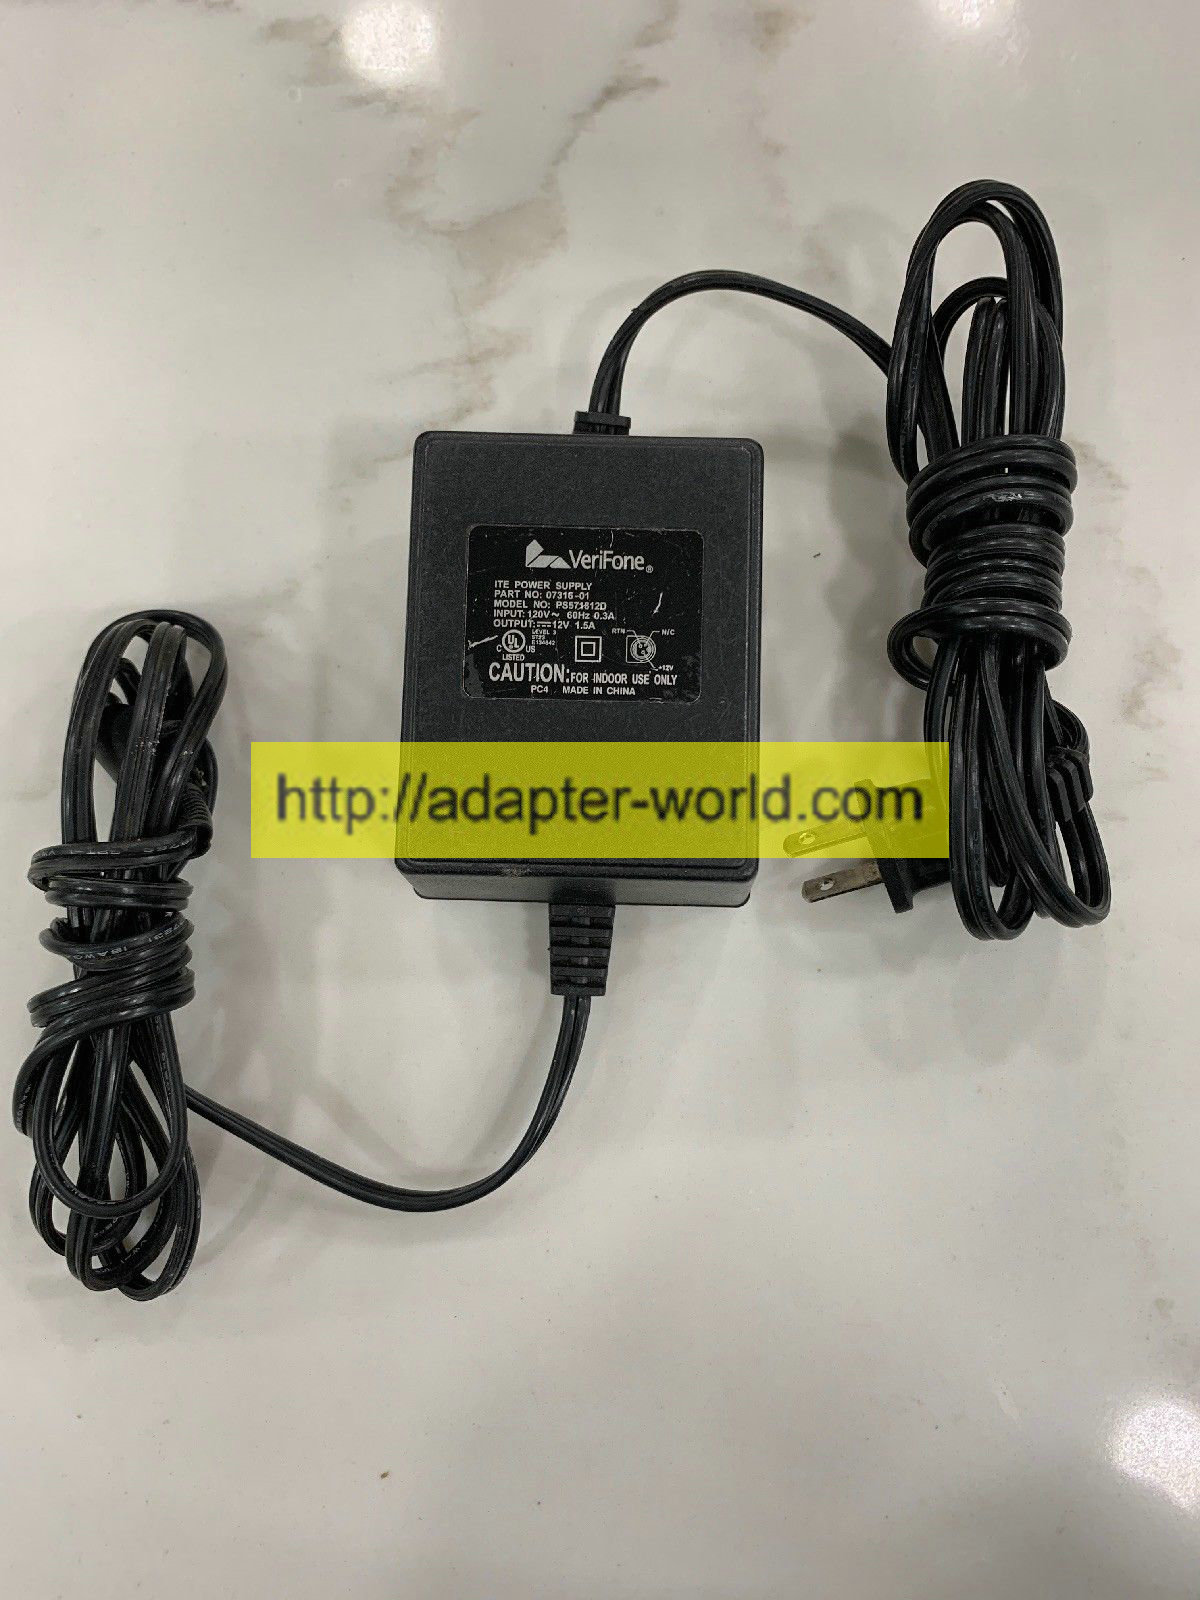 *100% Brand NEW* VeriFone 12V 1.5A Model PS571812D Part No 07316-01 0731601 AC Adapter Free shipping!